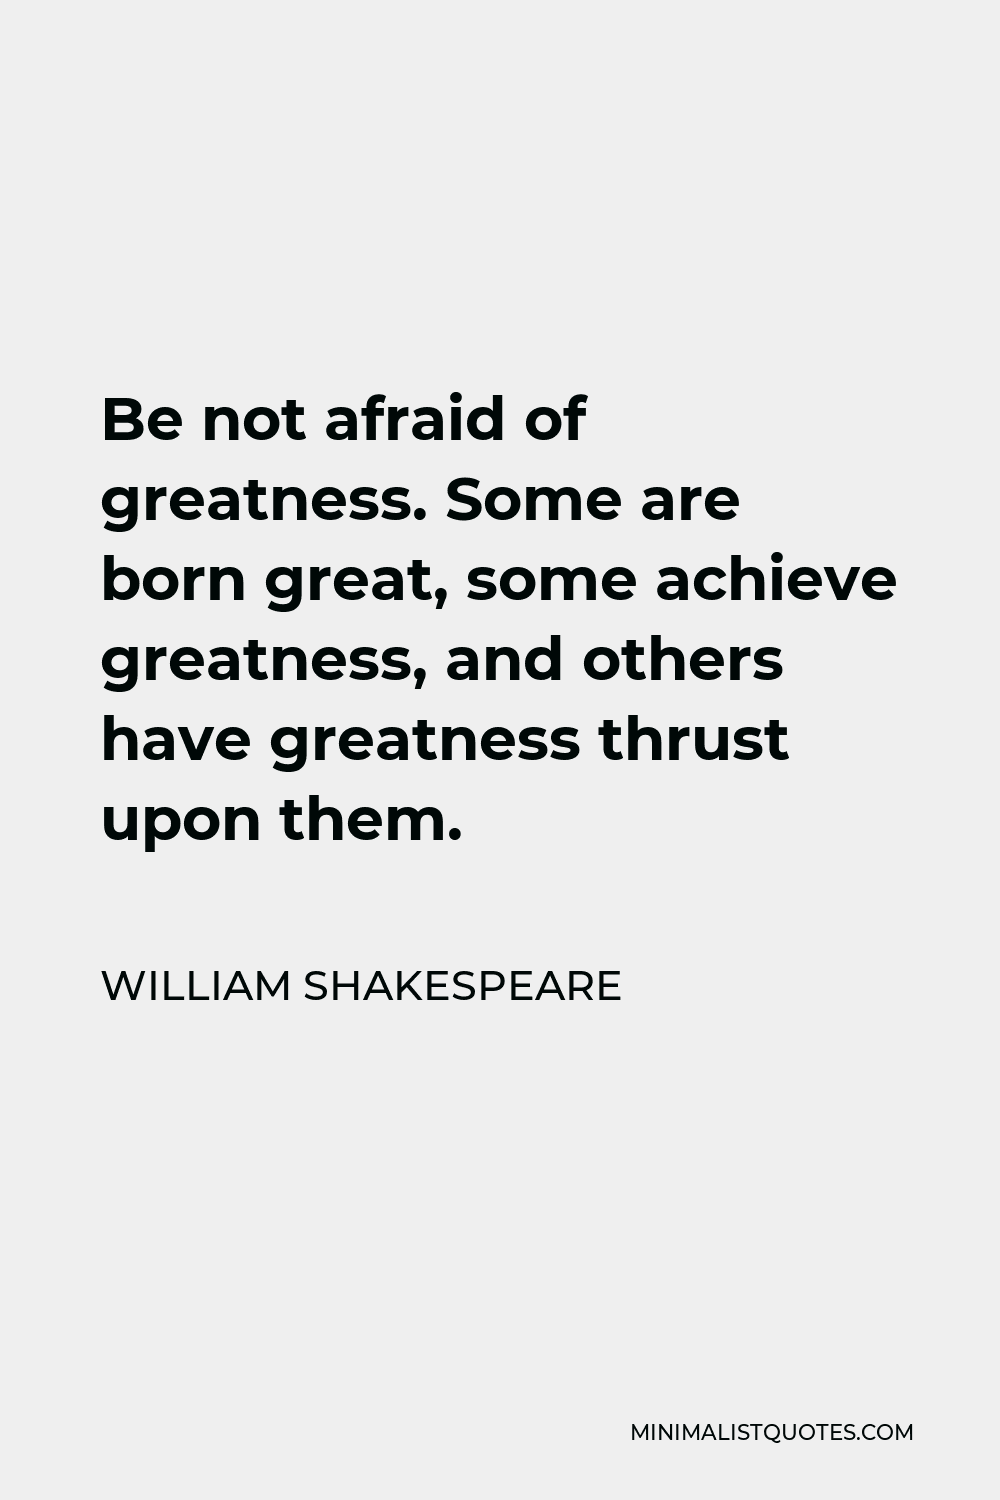 William Shakespeare Quote - Be not afraid of greatness. Some are born great, some achieve greatness, and others have greatness thrust upon them.